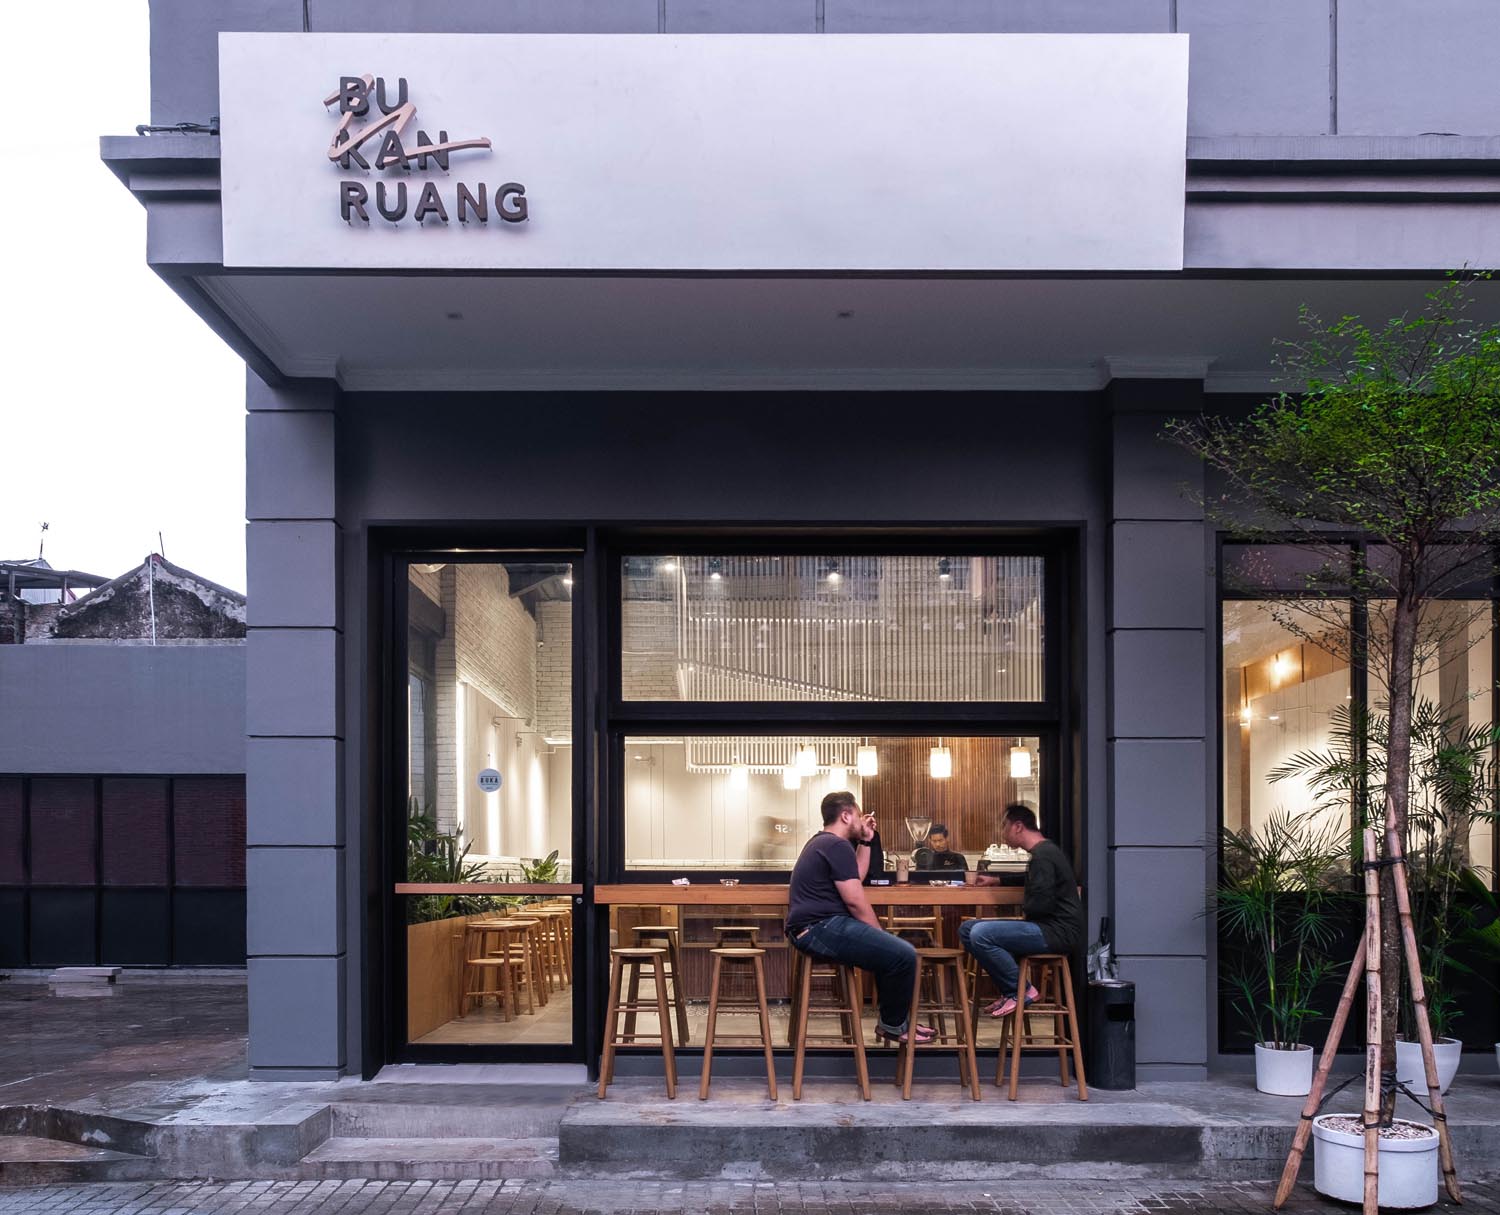 Bukan Ruang Café Shows Flexibility in Limited Space